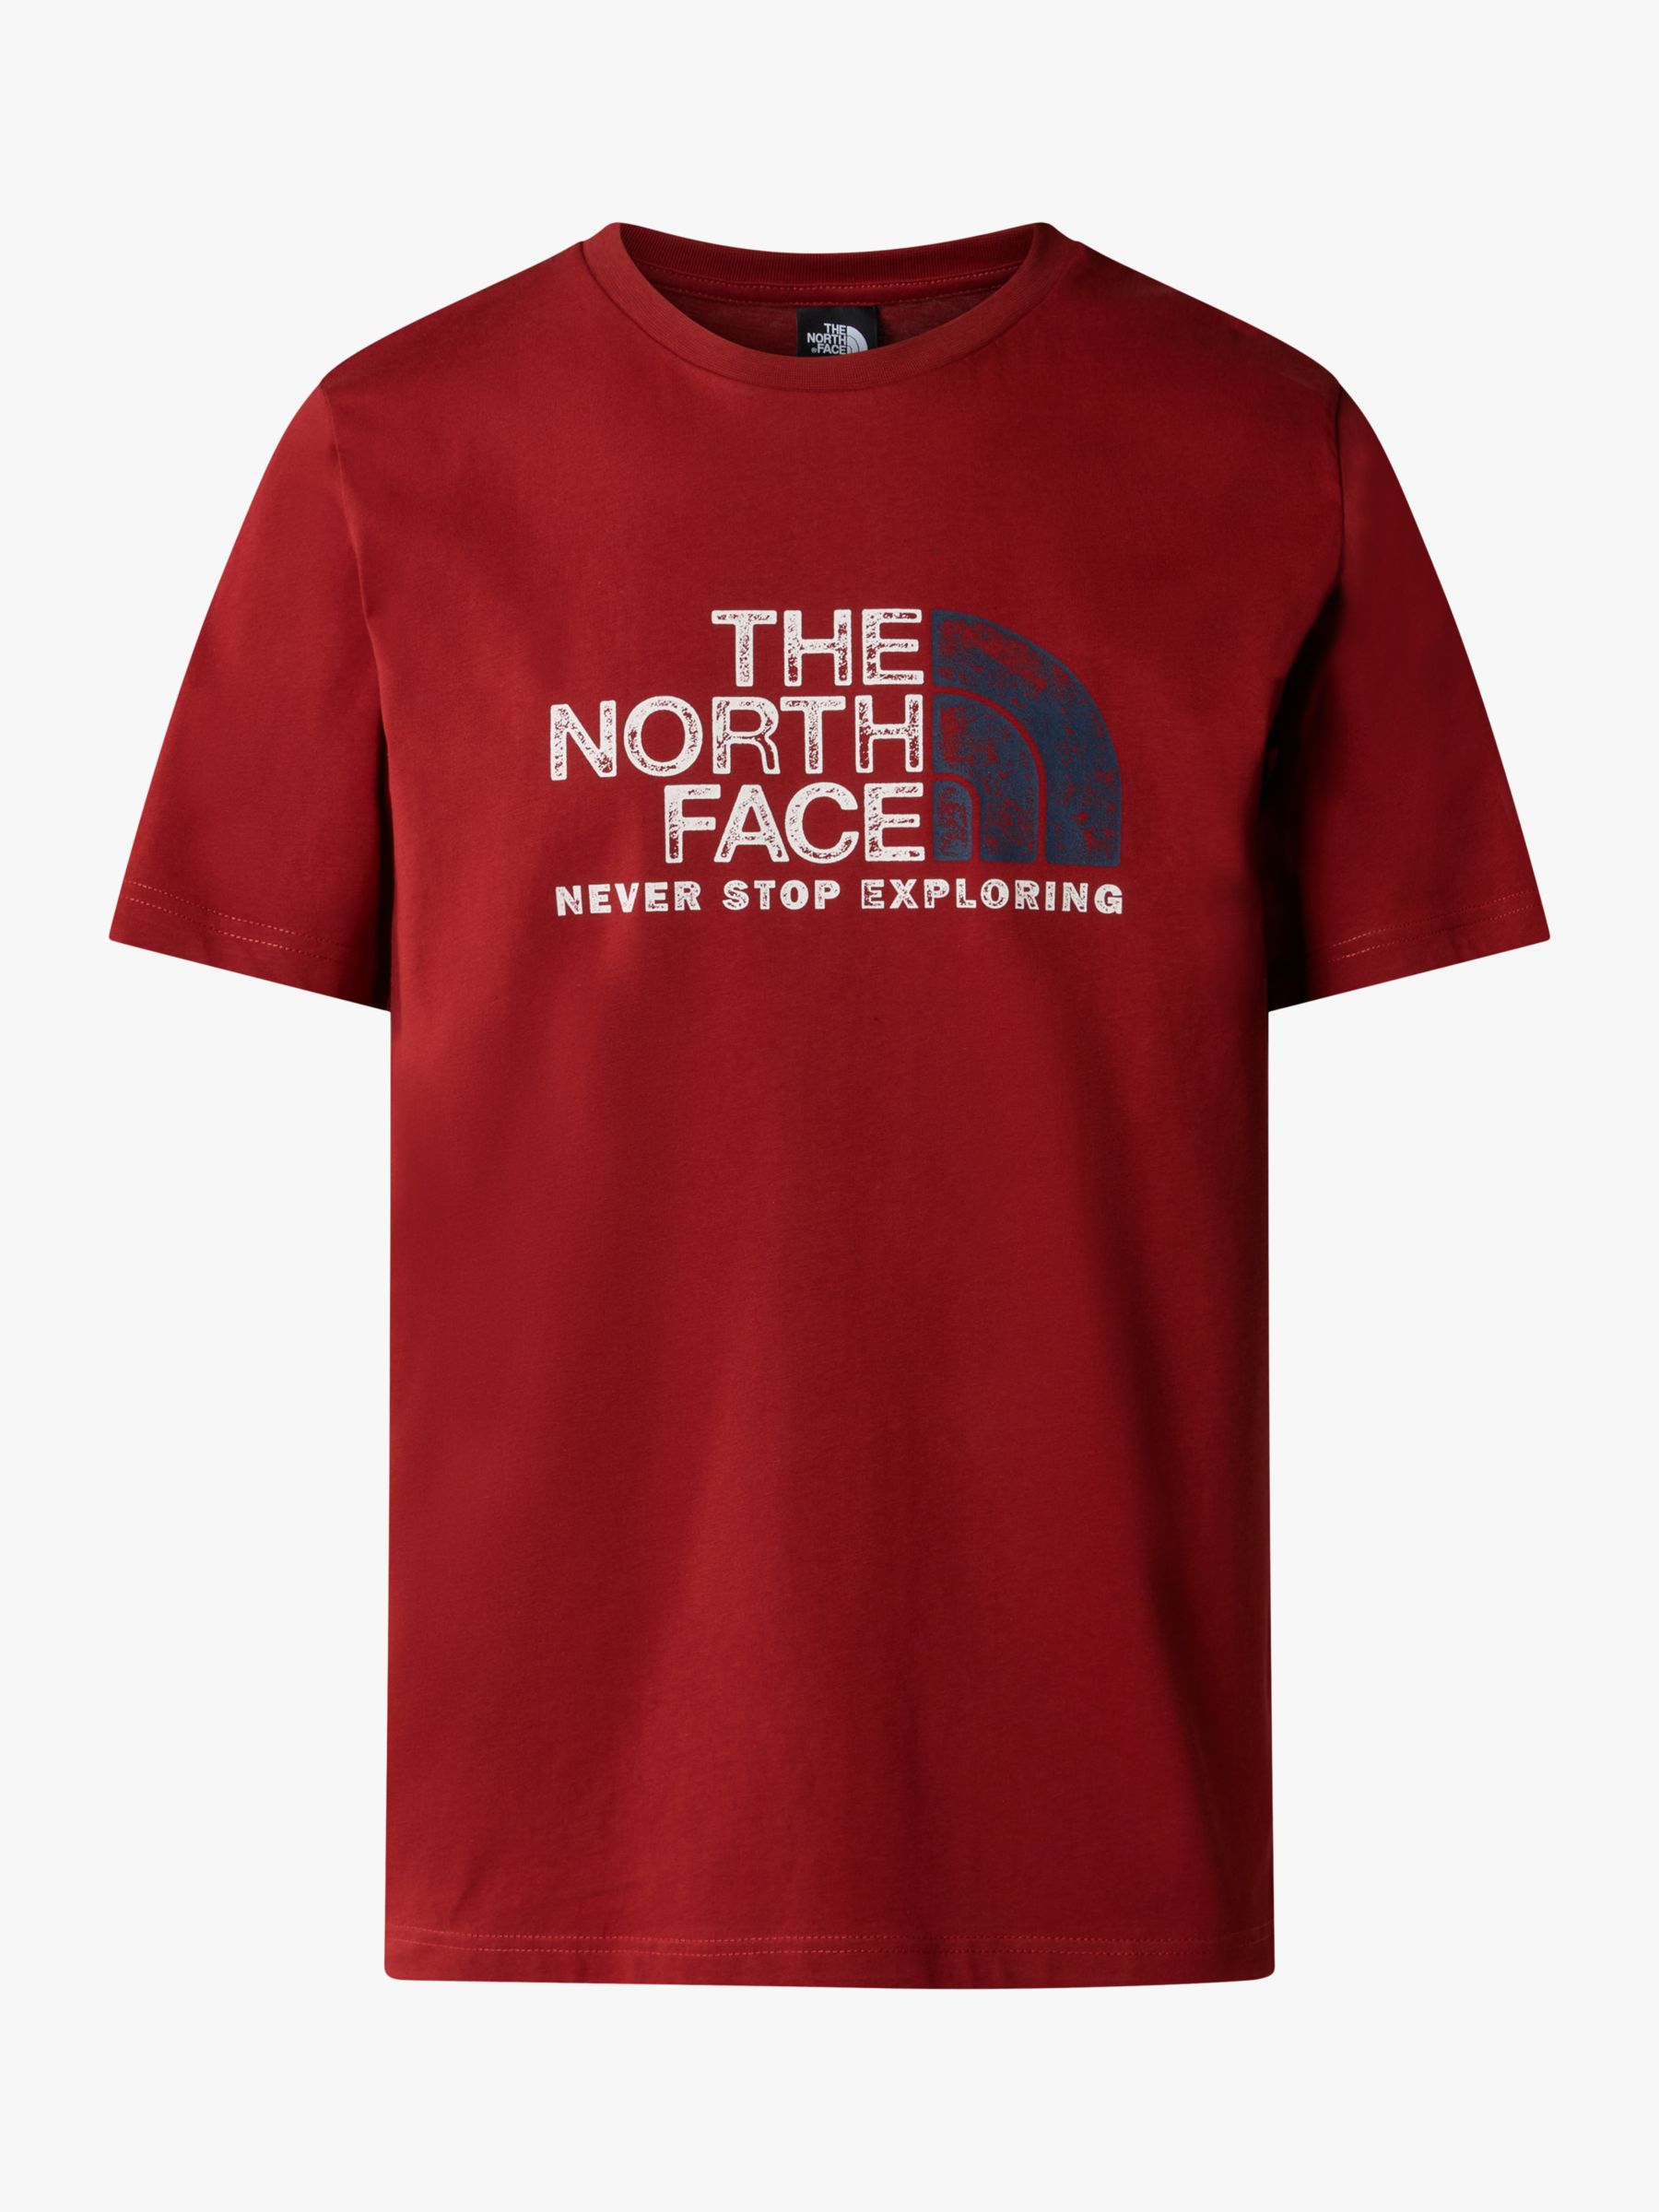 The North Face Short Sleeve Rust T-Shirt, Red, S